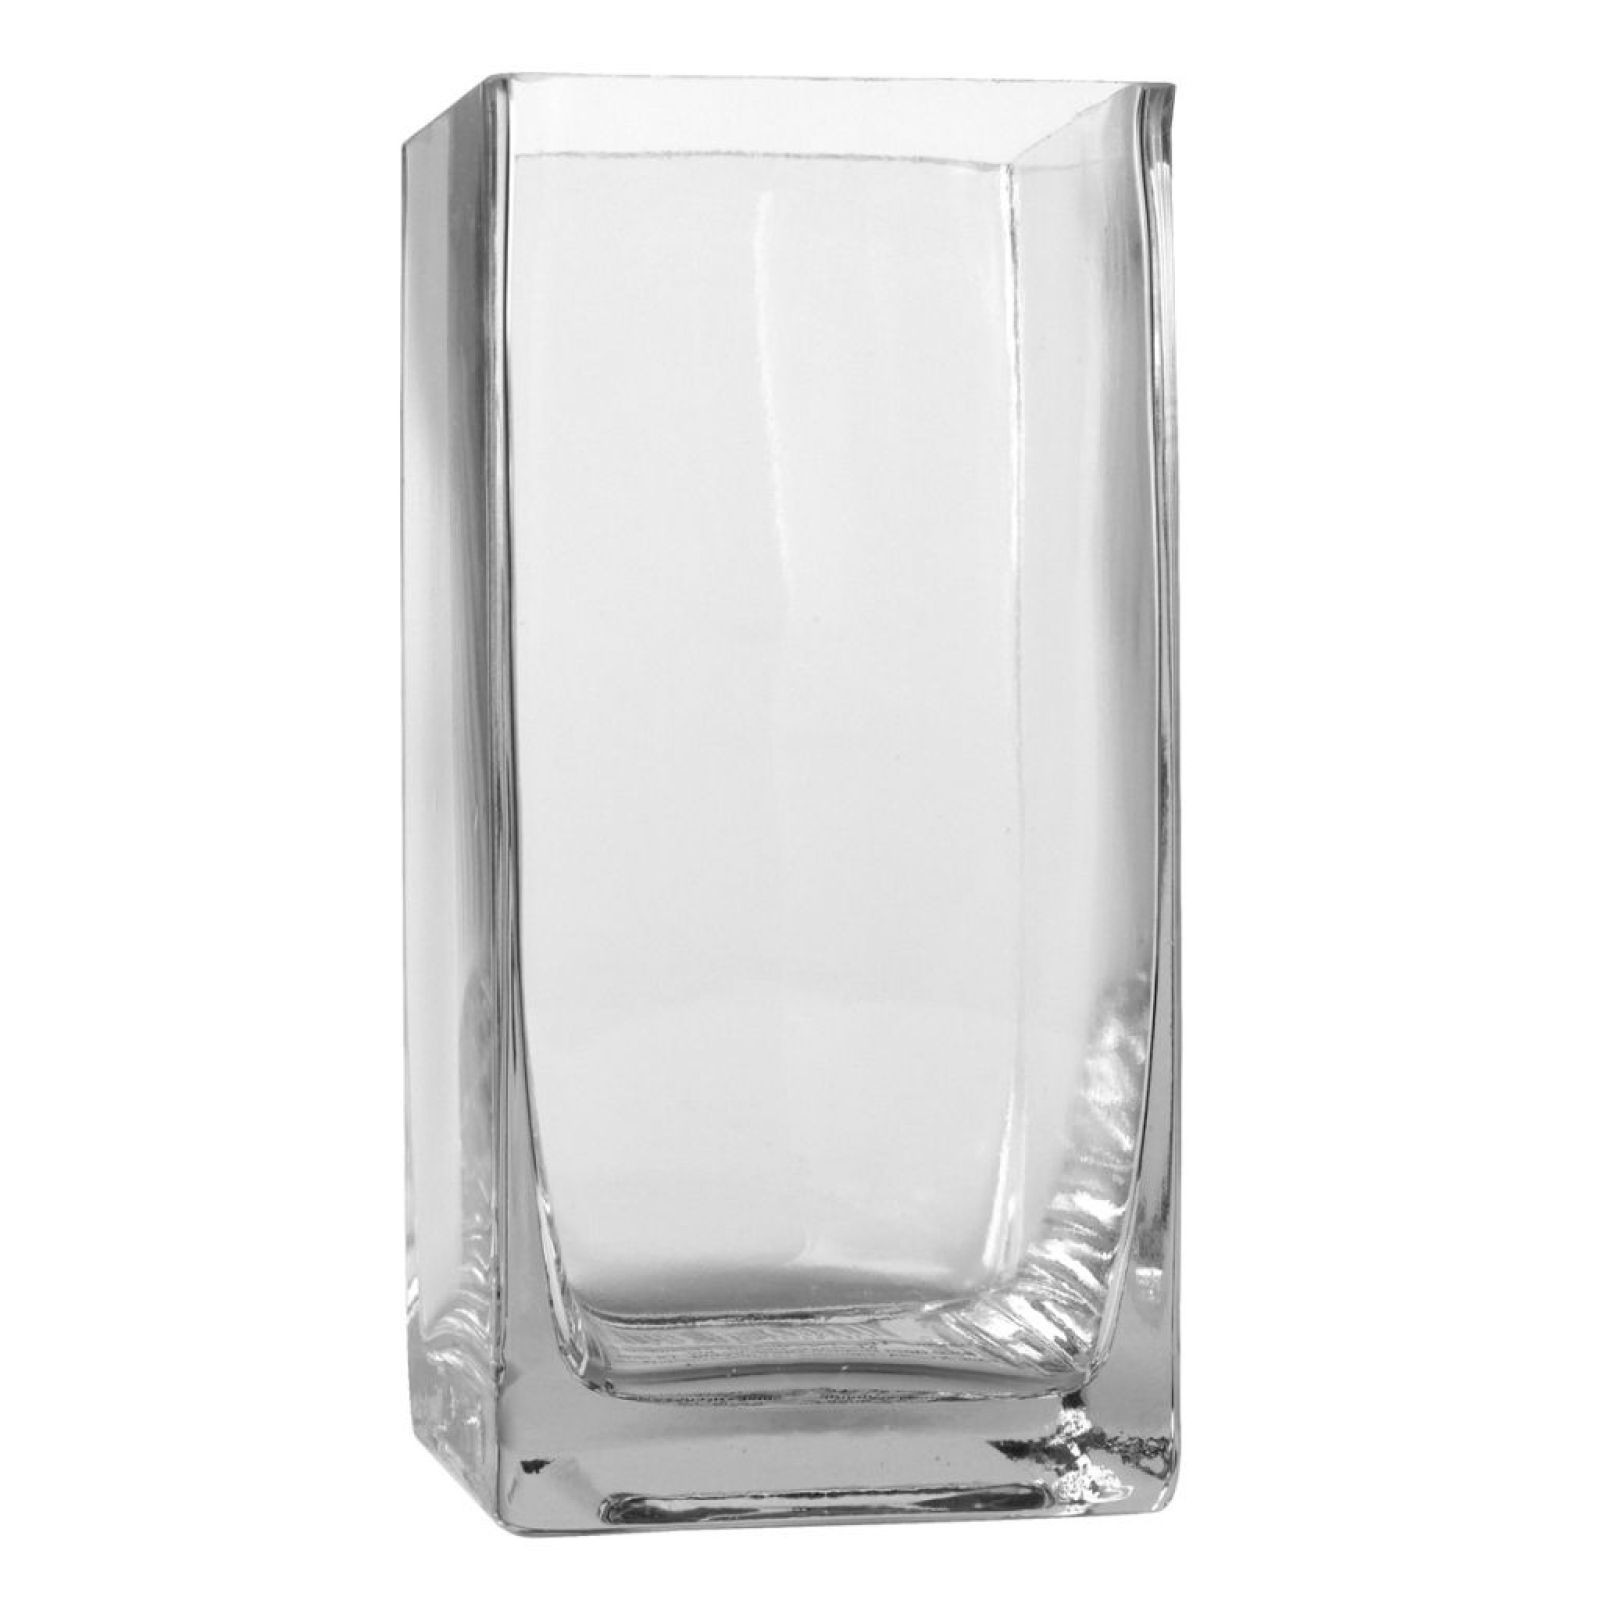 17 Fabulous 40 Inch Tall Glass Cylinder Vases 2024 free download 40 inch tall glass cylinder vases of ashland tall cube glass vase cube and glass within ashlanda tall cube glass vase 6